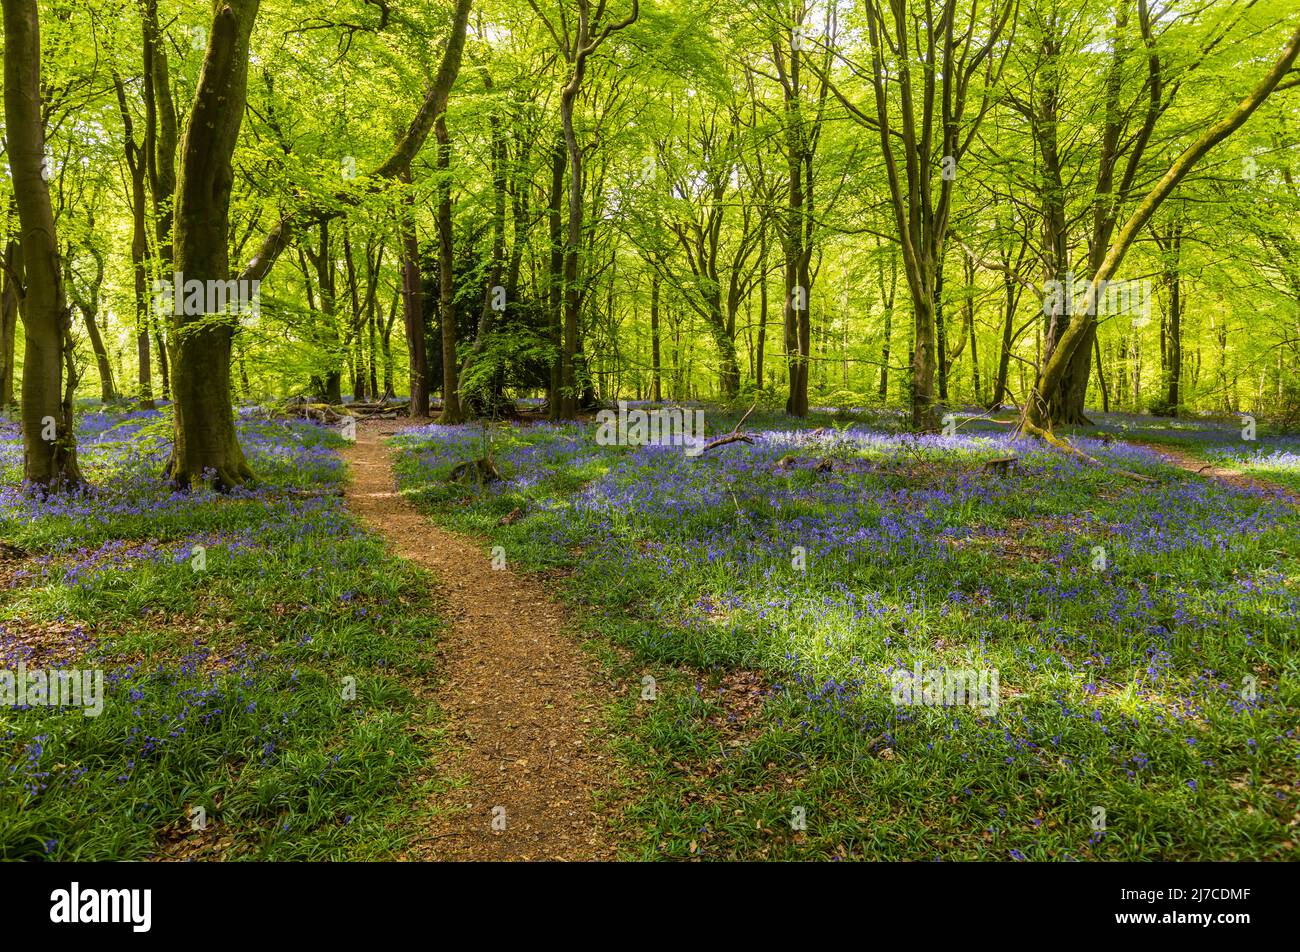 English bluebells (Hyacinthoides non-scripta) flowering in spring at White Down, Abinger Hammer in the Surrey Hills Area of outstanding Natural Beauty Stock Photo